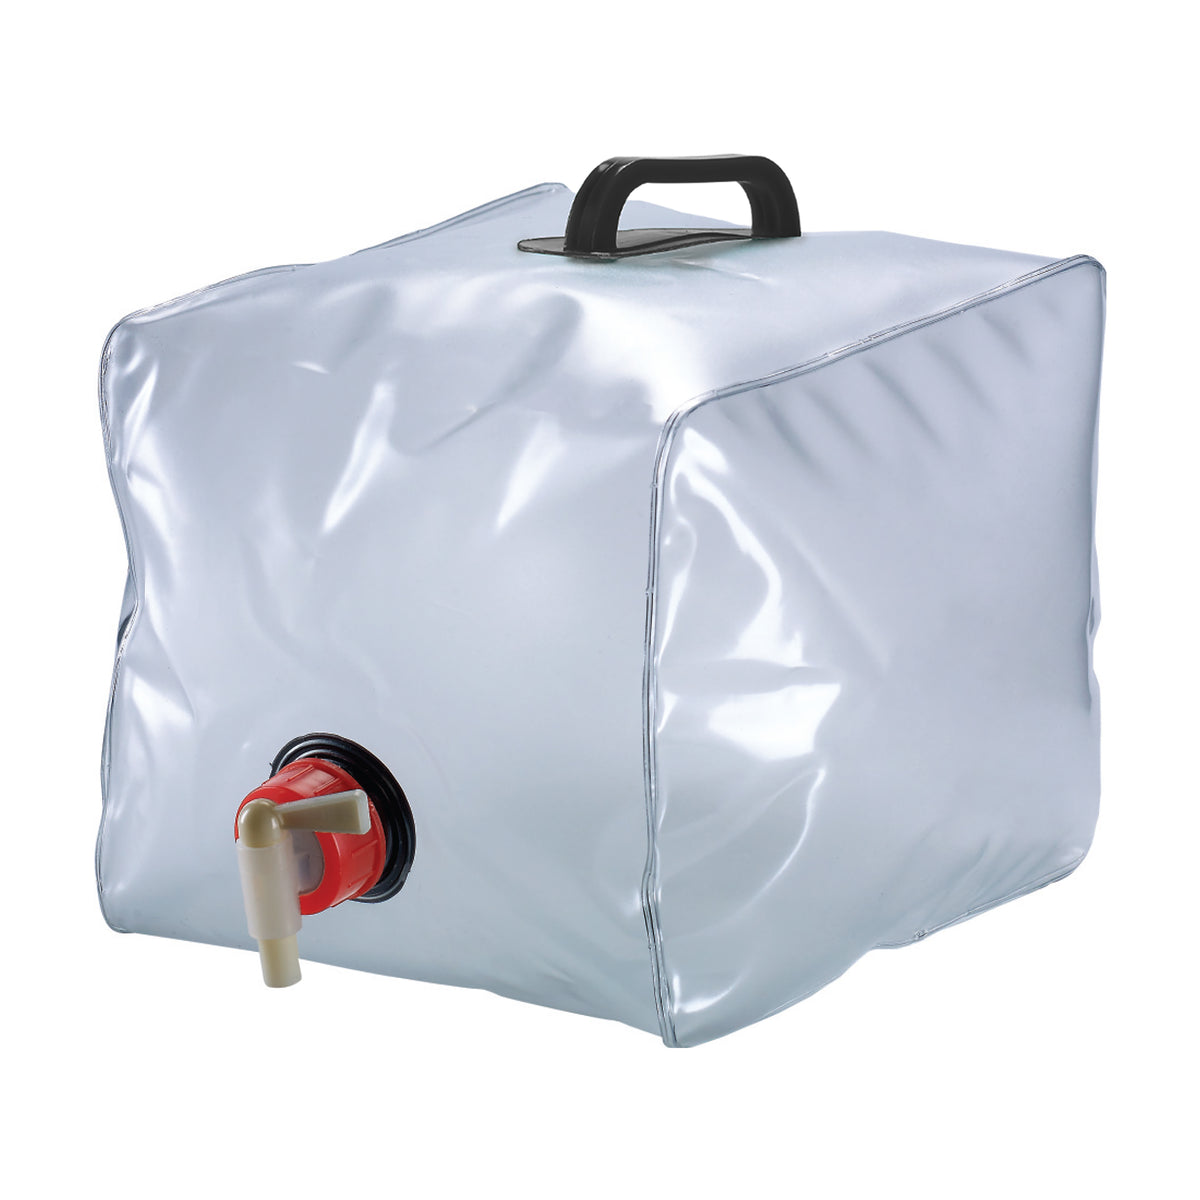 TrailGear 5 Gallon Collapsible Water Container with Handy on and off Spout and Comfortable Carry Handle.